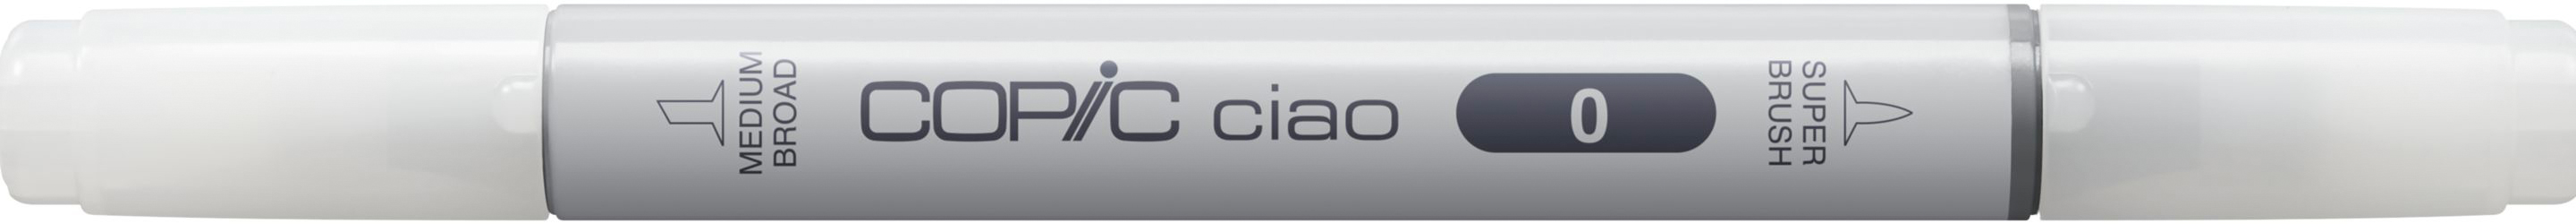 COPIC Marker Ciao 2207518 0 - Colorless Blender 0 - Colorless Blender